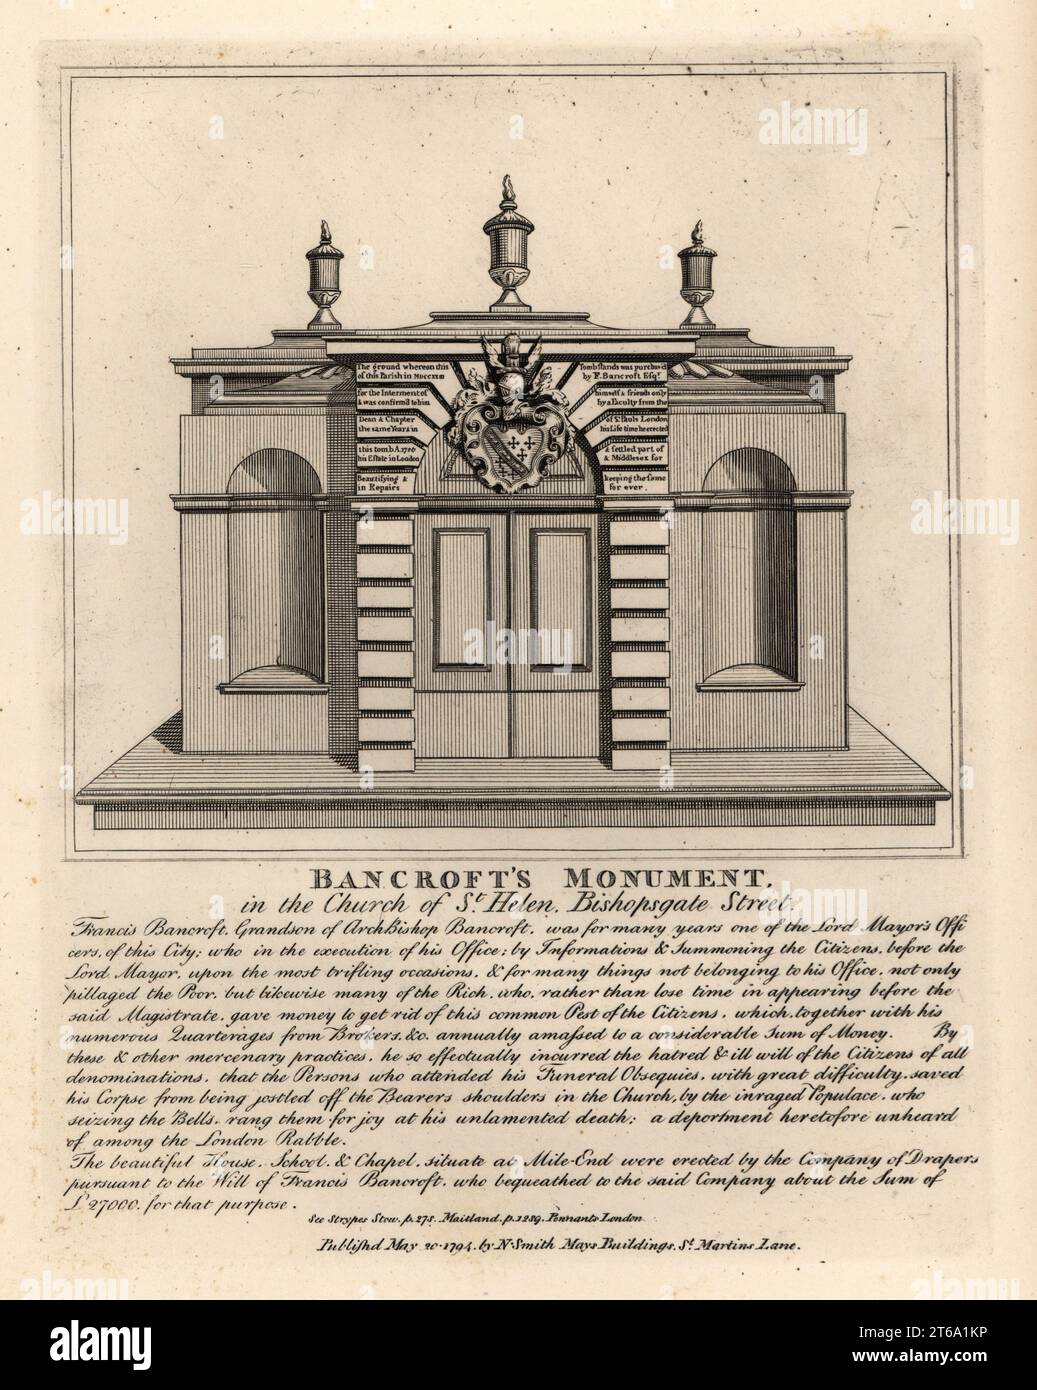 Monument of Thomas Bancroft, Lord Mayors Officer, in the church of St. Helen, Bishopsgate Street. Copperplate engraving by John Thomas Smith after original drawings by members of the Society of Antiquaries from his J.T. Smiths Antiquities of London and its Environs, J. Sewell, R. Folder, J. Simco, London, 1794. Stock Photo